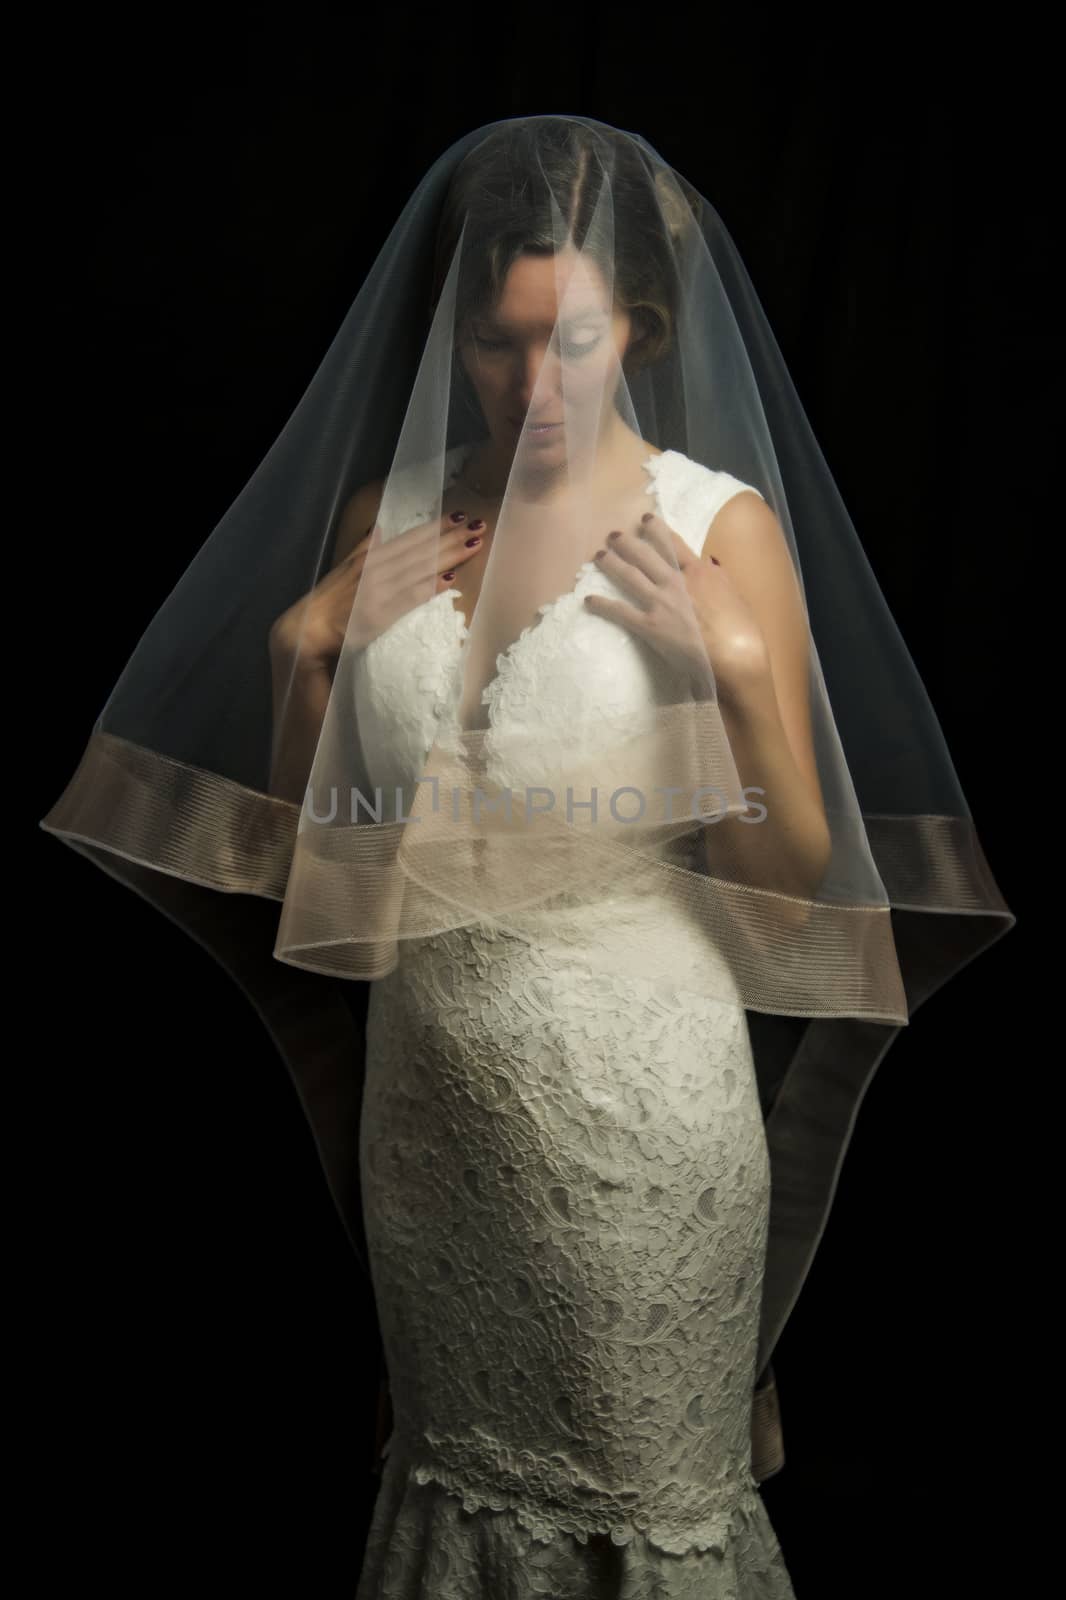 Portrait of a beautiful girl in image of the bride. Photo shot in the Studio on a black background